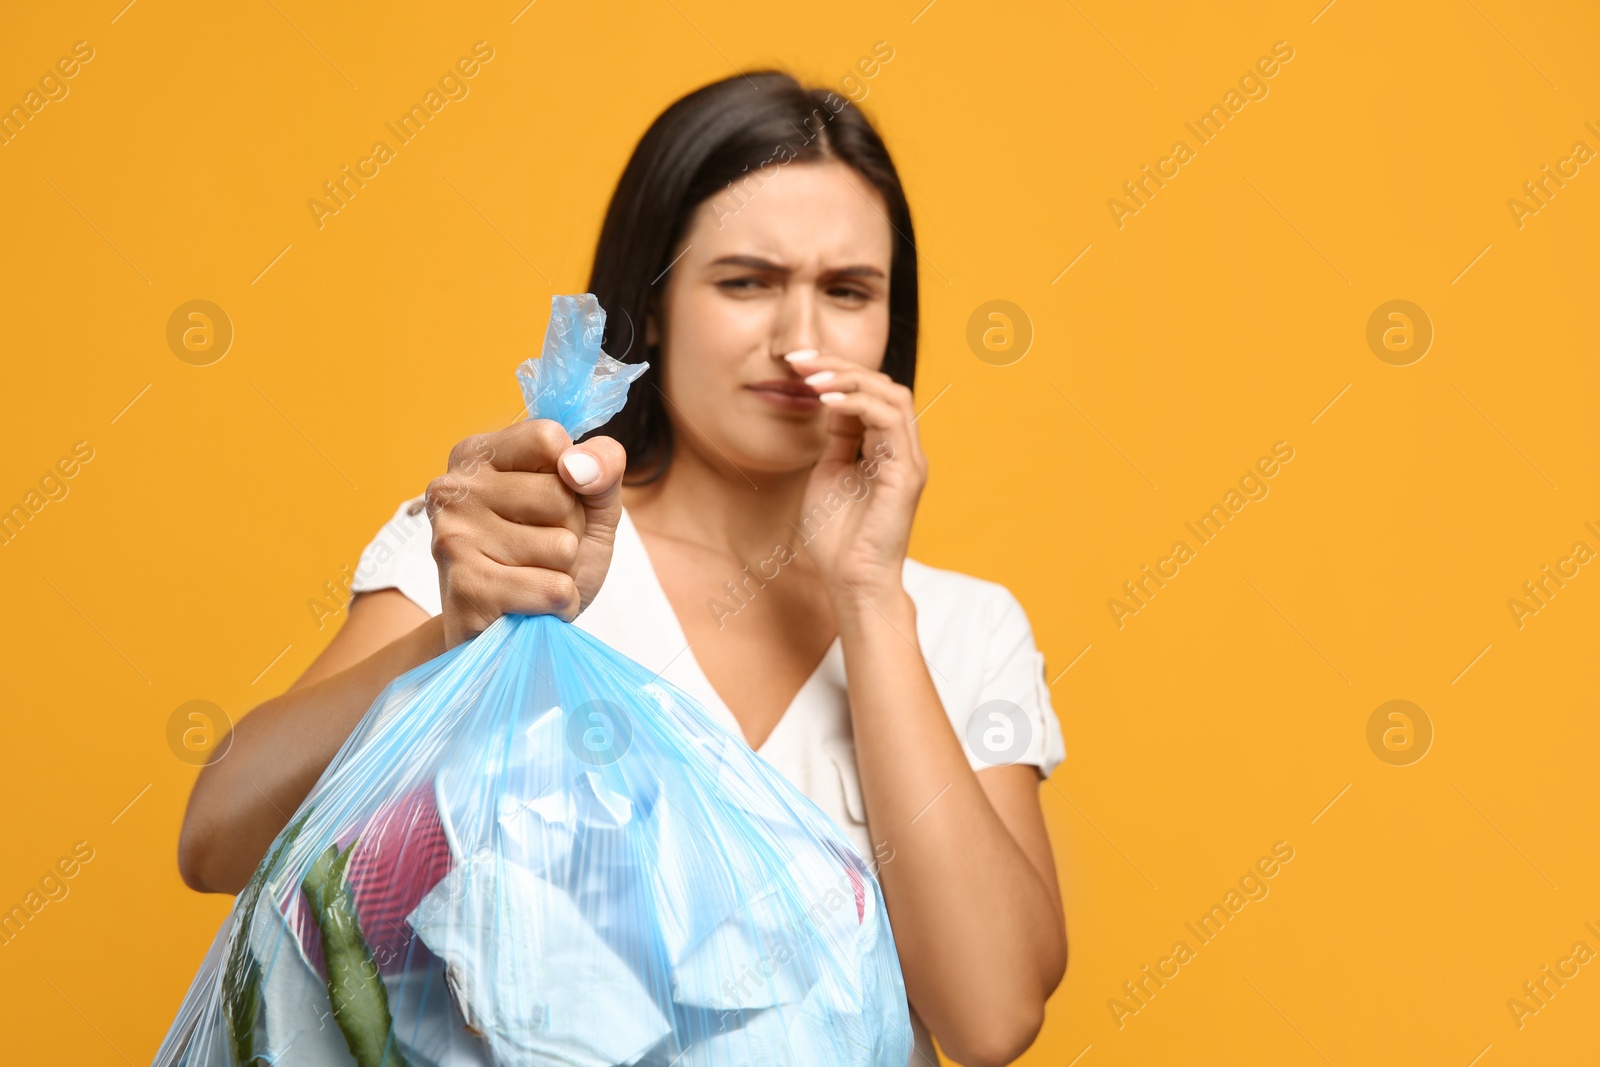 Photo of Woman holding full garbage bag against yellow background, focus on hand